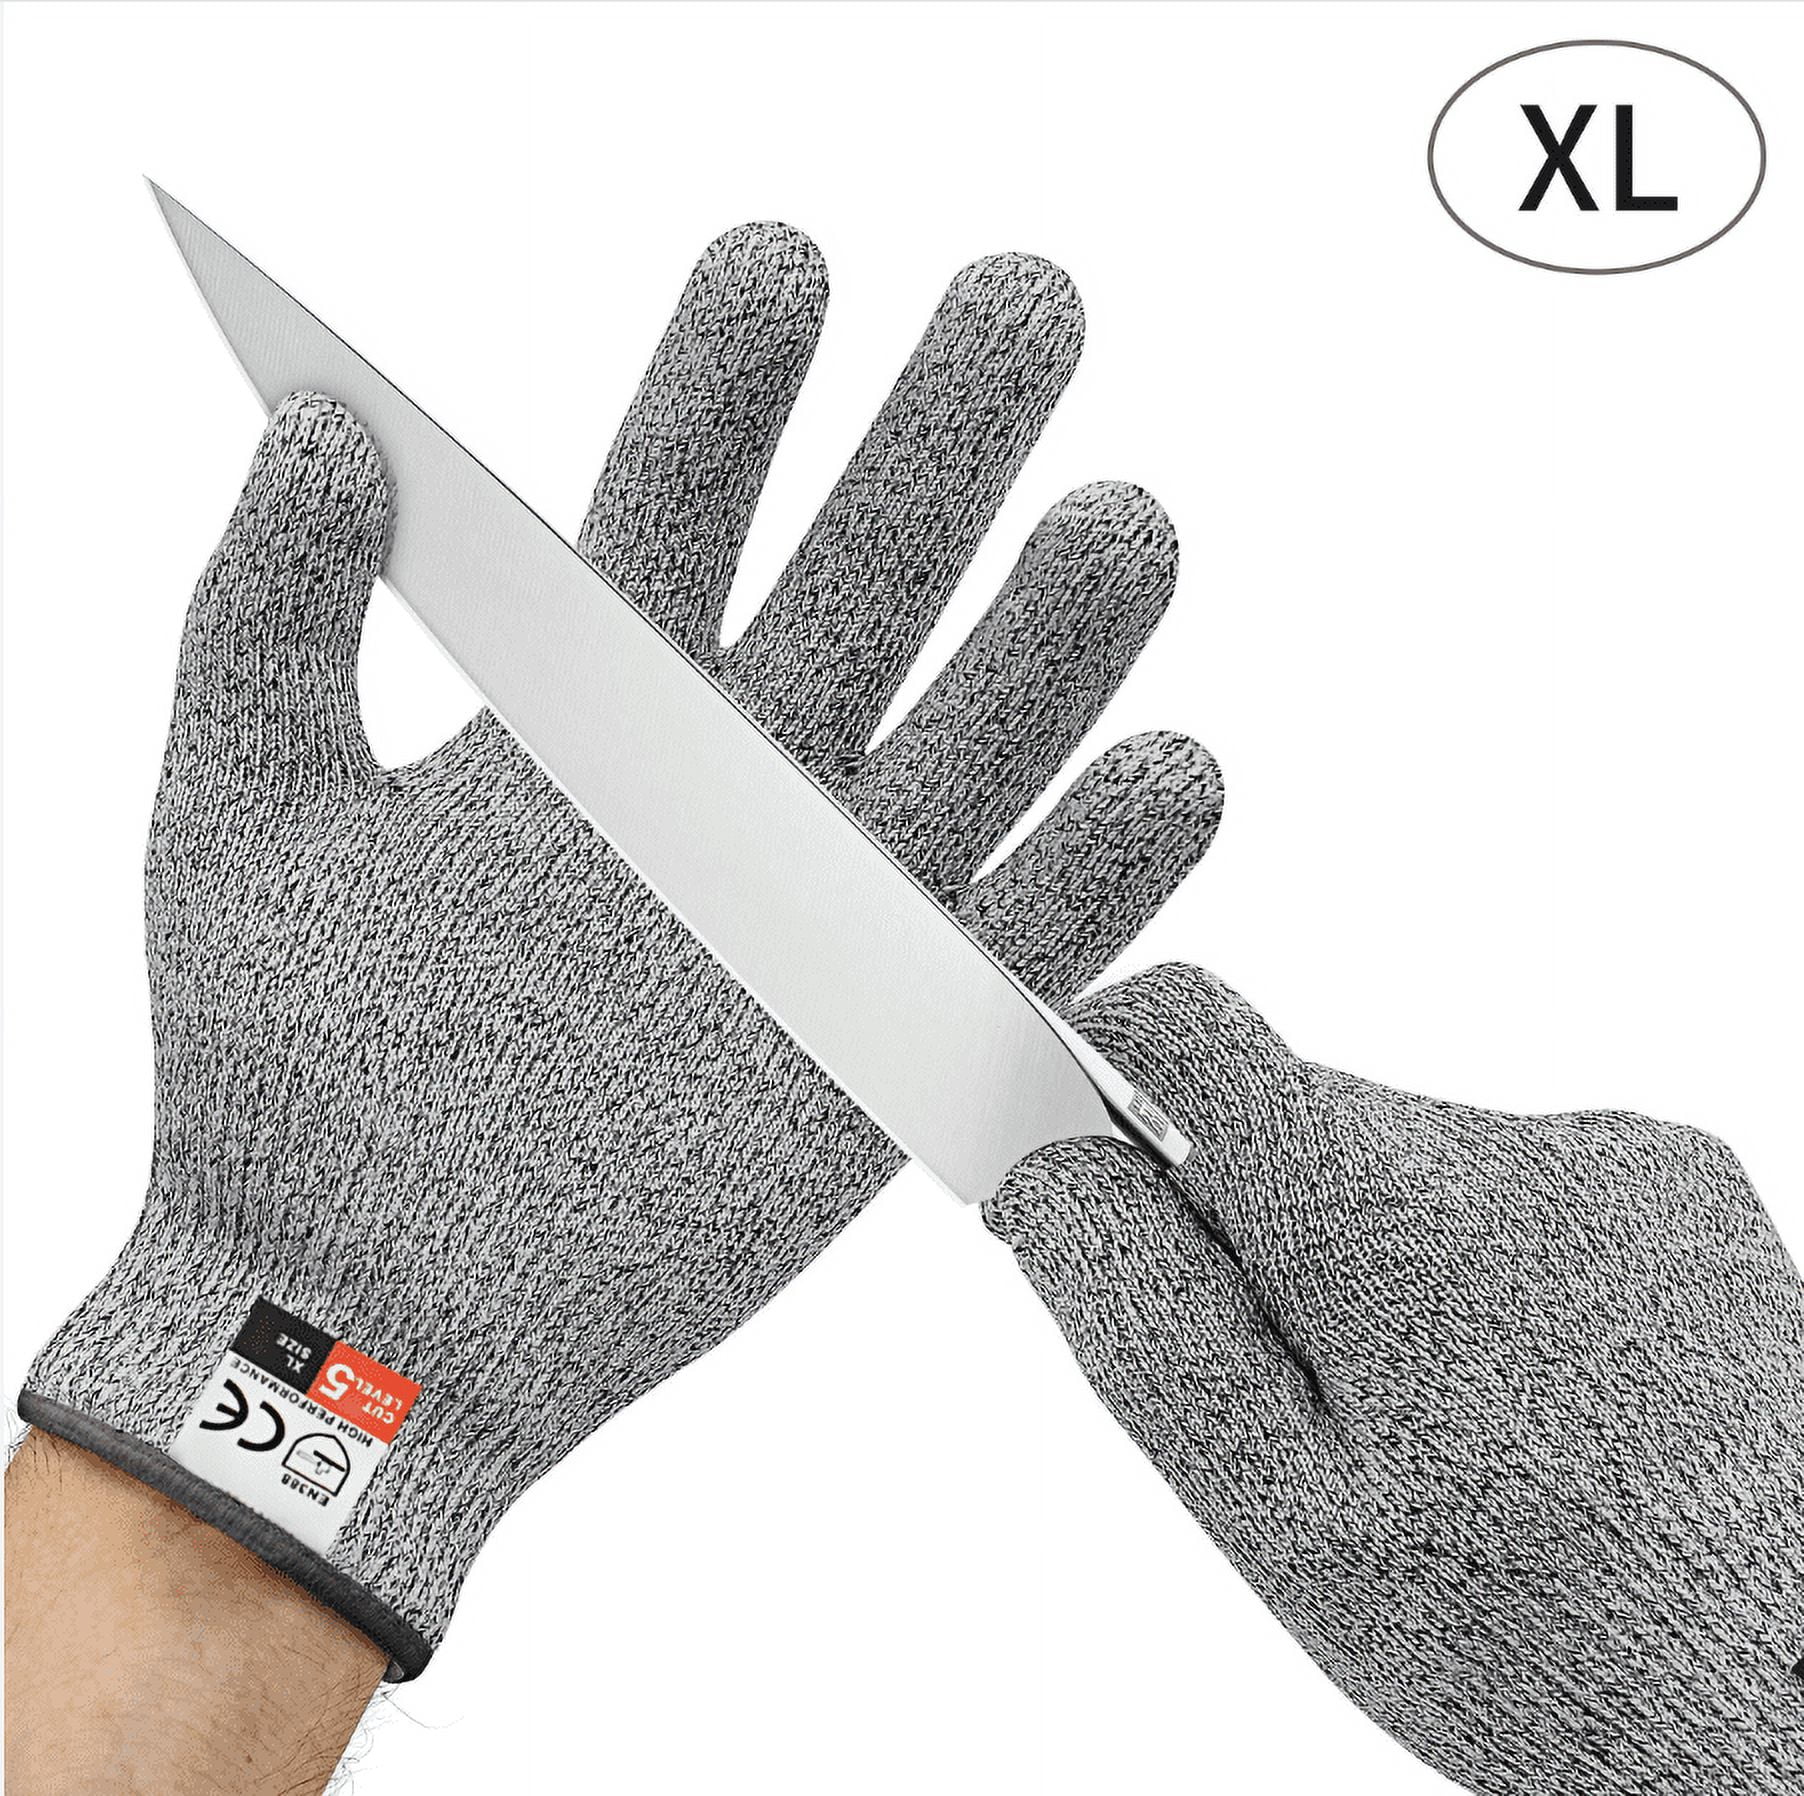 NoCry Cut Resistant Gloves Kitchen Large, TECBOX High Performance CE Level  5 Protection, Food Grade Kitchen and Work Safety Gloves - Size Extra Large